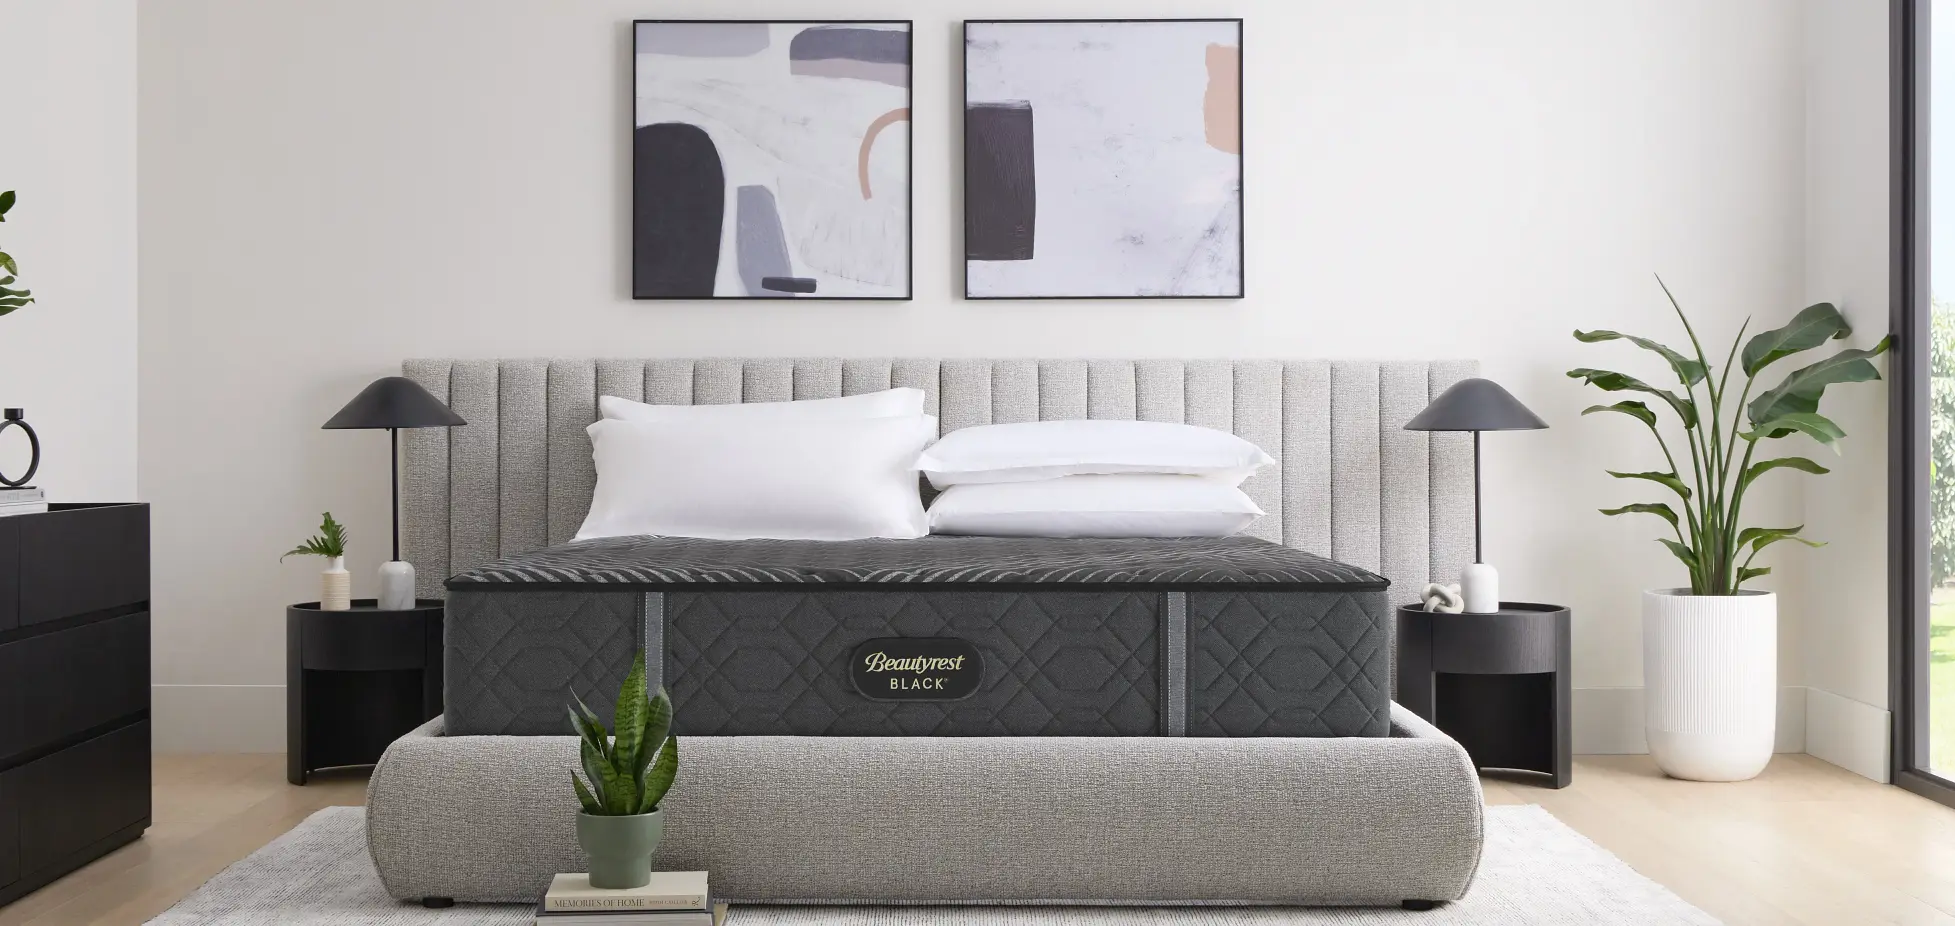 Save up to $1200 on Top Mattress Brands*